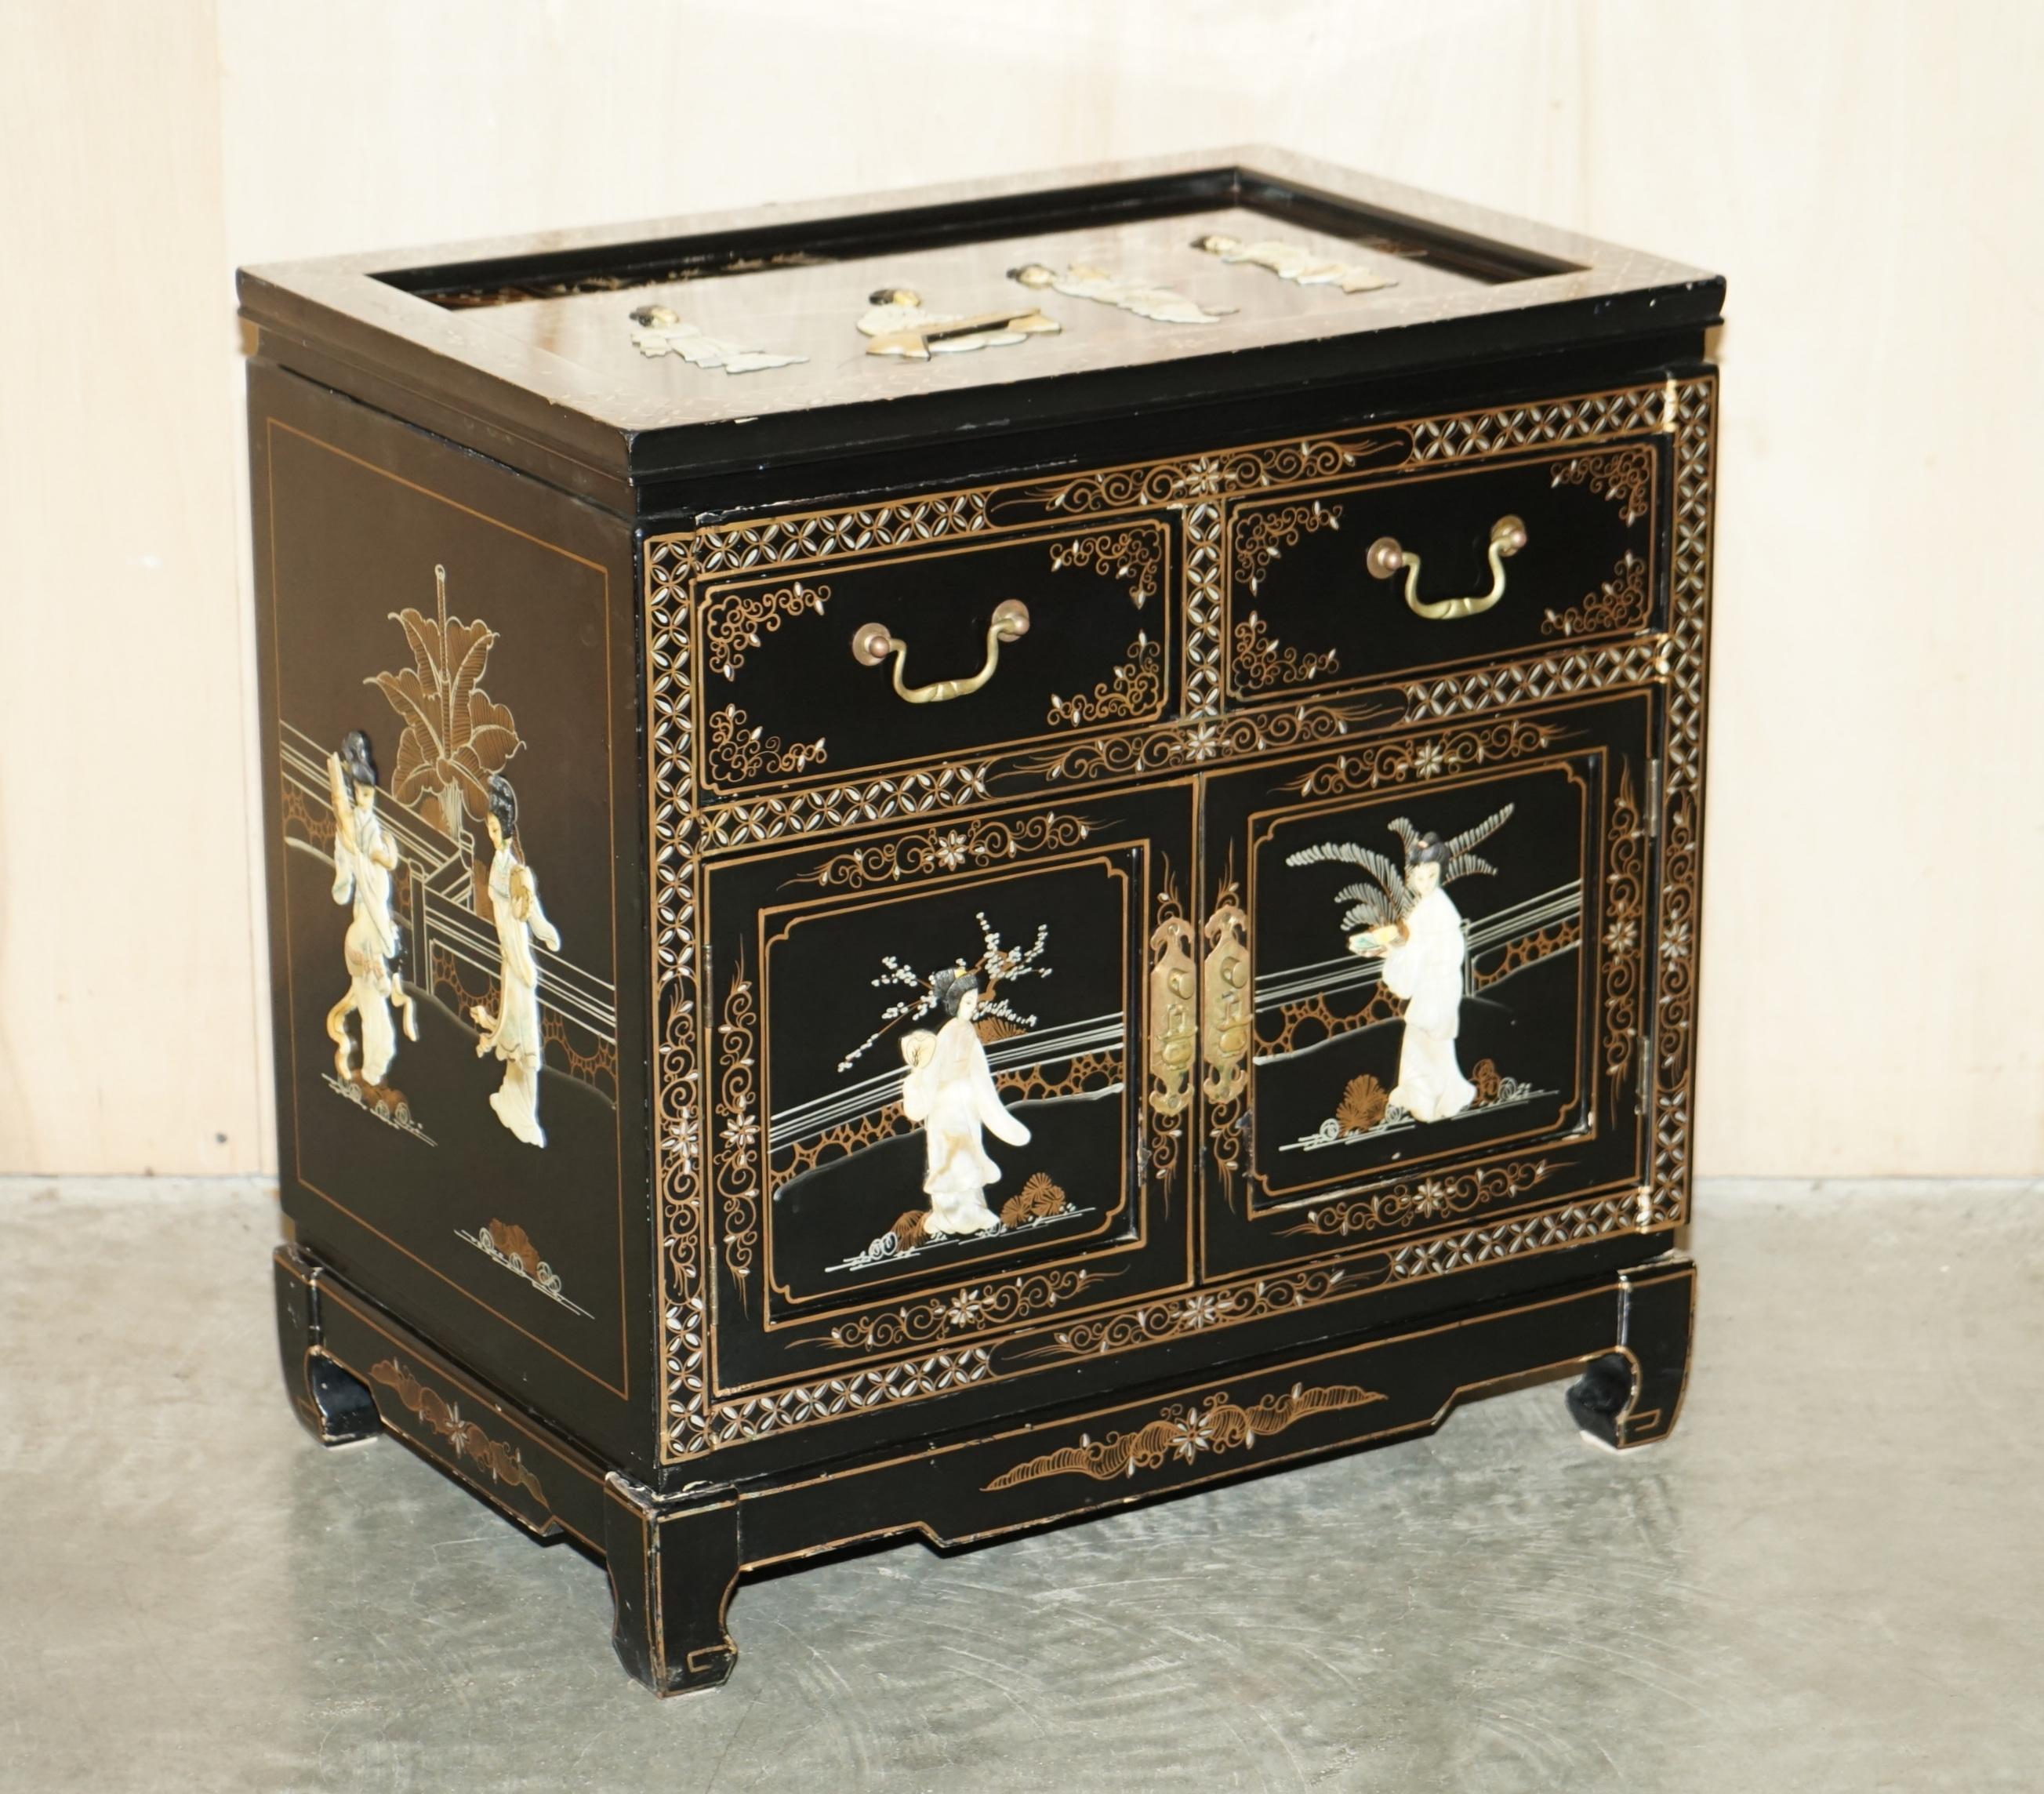 Royal House Antiques

Royal House Antiques is delighted to offer for sale this lovely vintage Chinese side cabinet with native scenes of Geisha girls carved out of soapstone and decorated in the Chinoiserie style

Please note the delivery fee listed